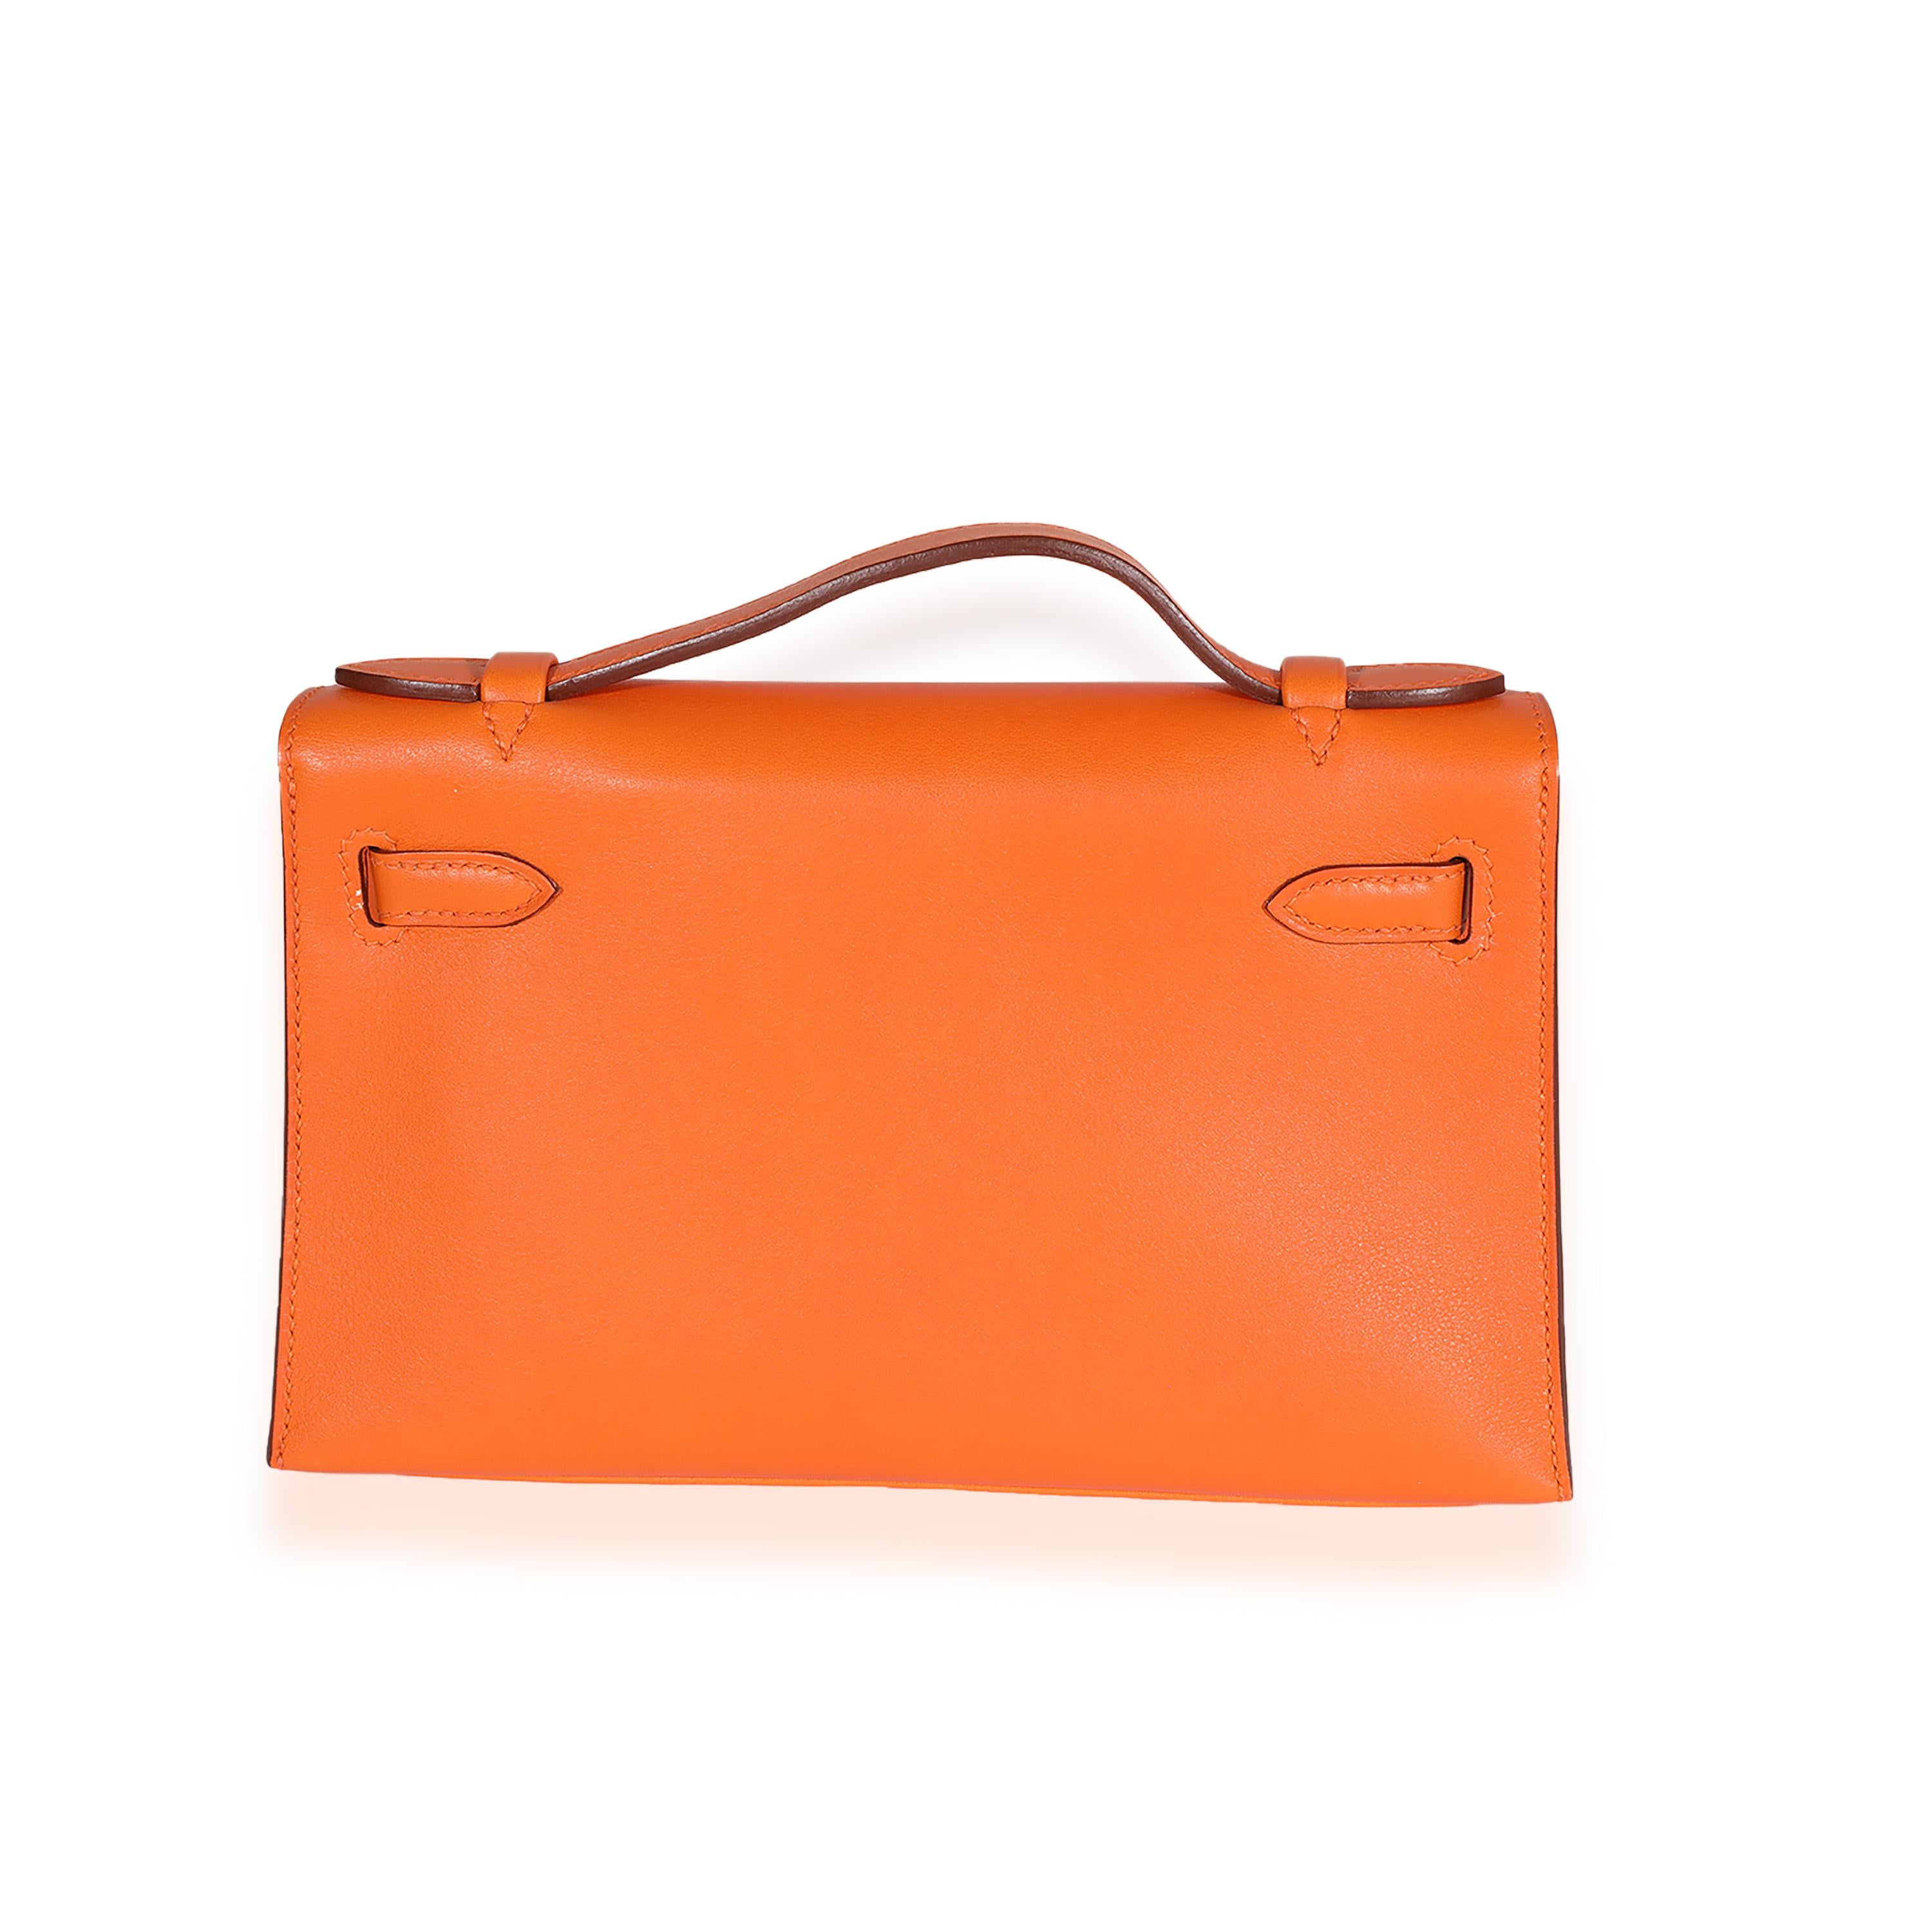 Listing Title: Hermès Orange H Swift Kelly Pochette GHW
SKU: 122817
Condition: Pre-owned 
Handbag Condition: Excellent
Condition Comments: Excellent Conditions. Scuffing at exterior. Plastic at hardware. No other signs of wear.
Brand: Hermès
Model: